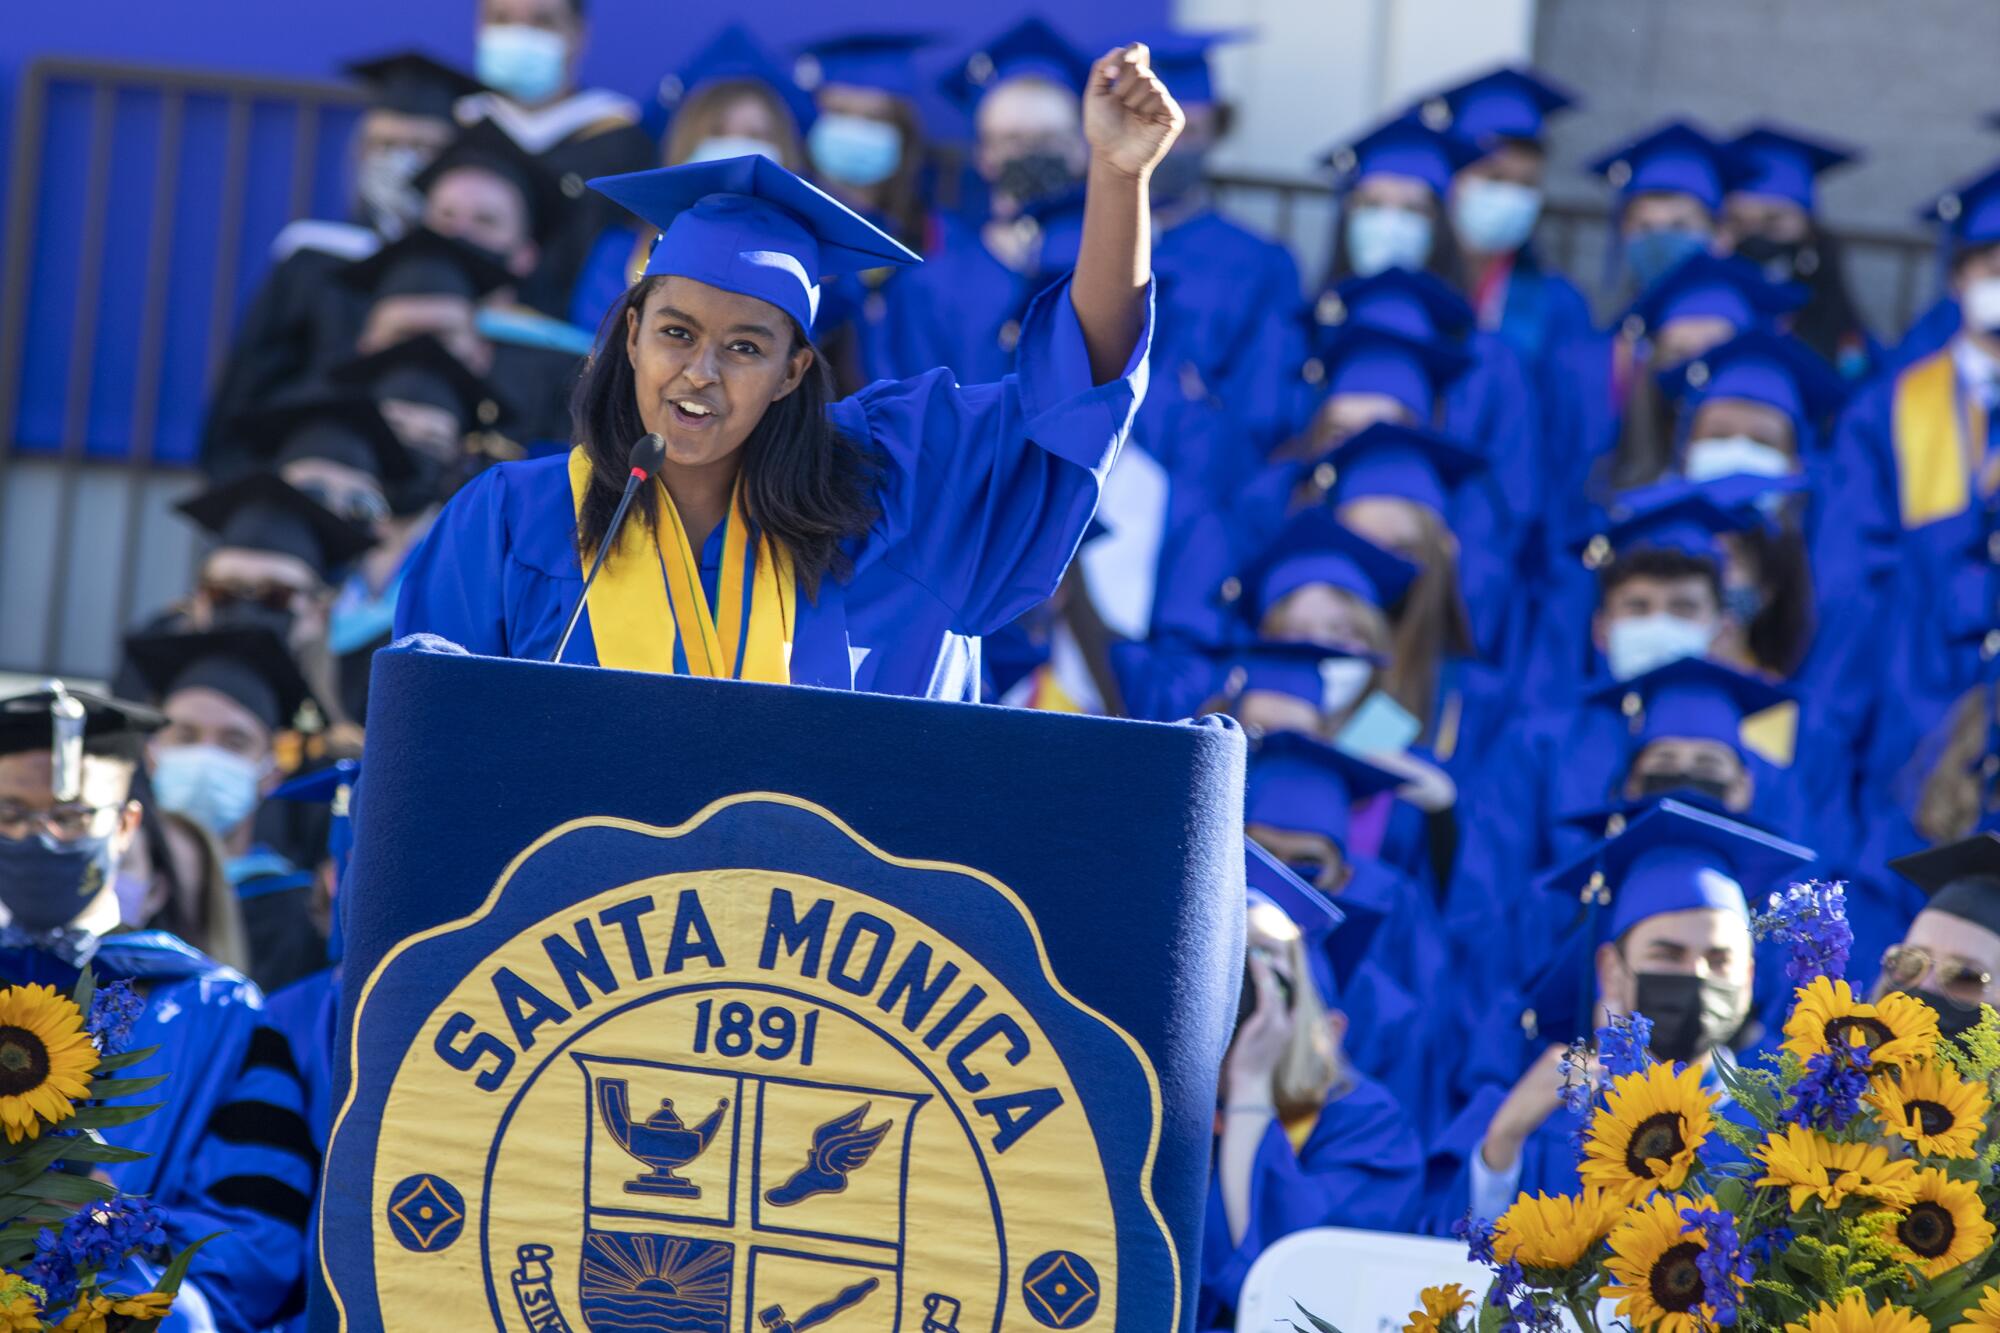 A high school graduate in cap and gown speaks into a microphone at a lectern and lifts one fist in the air.